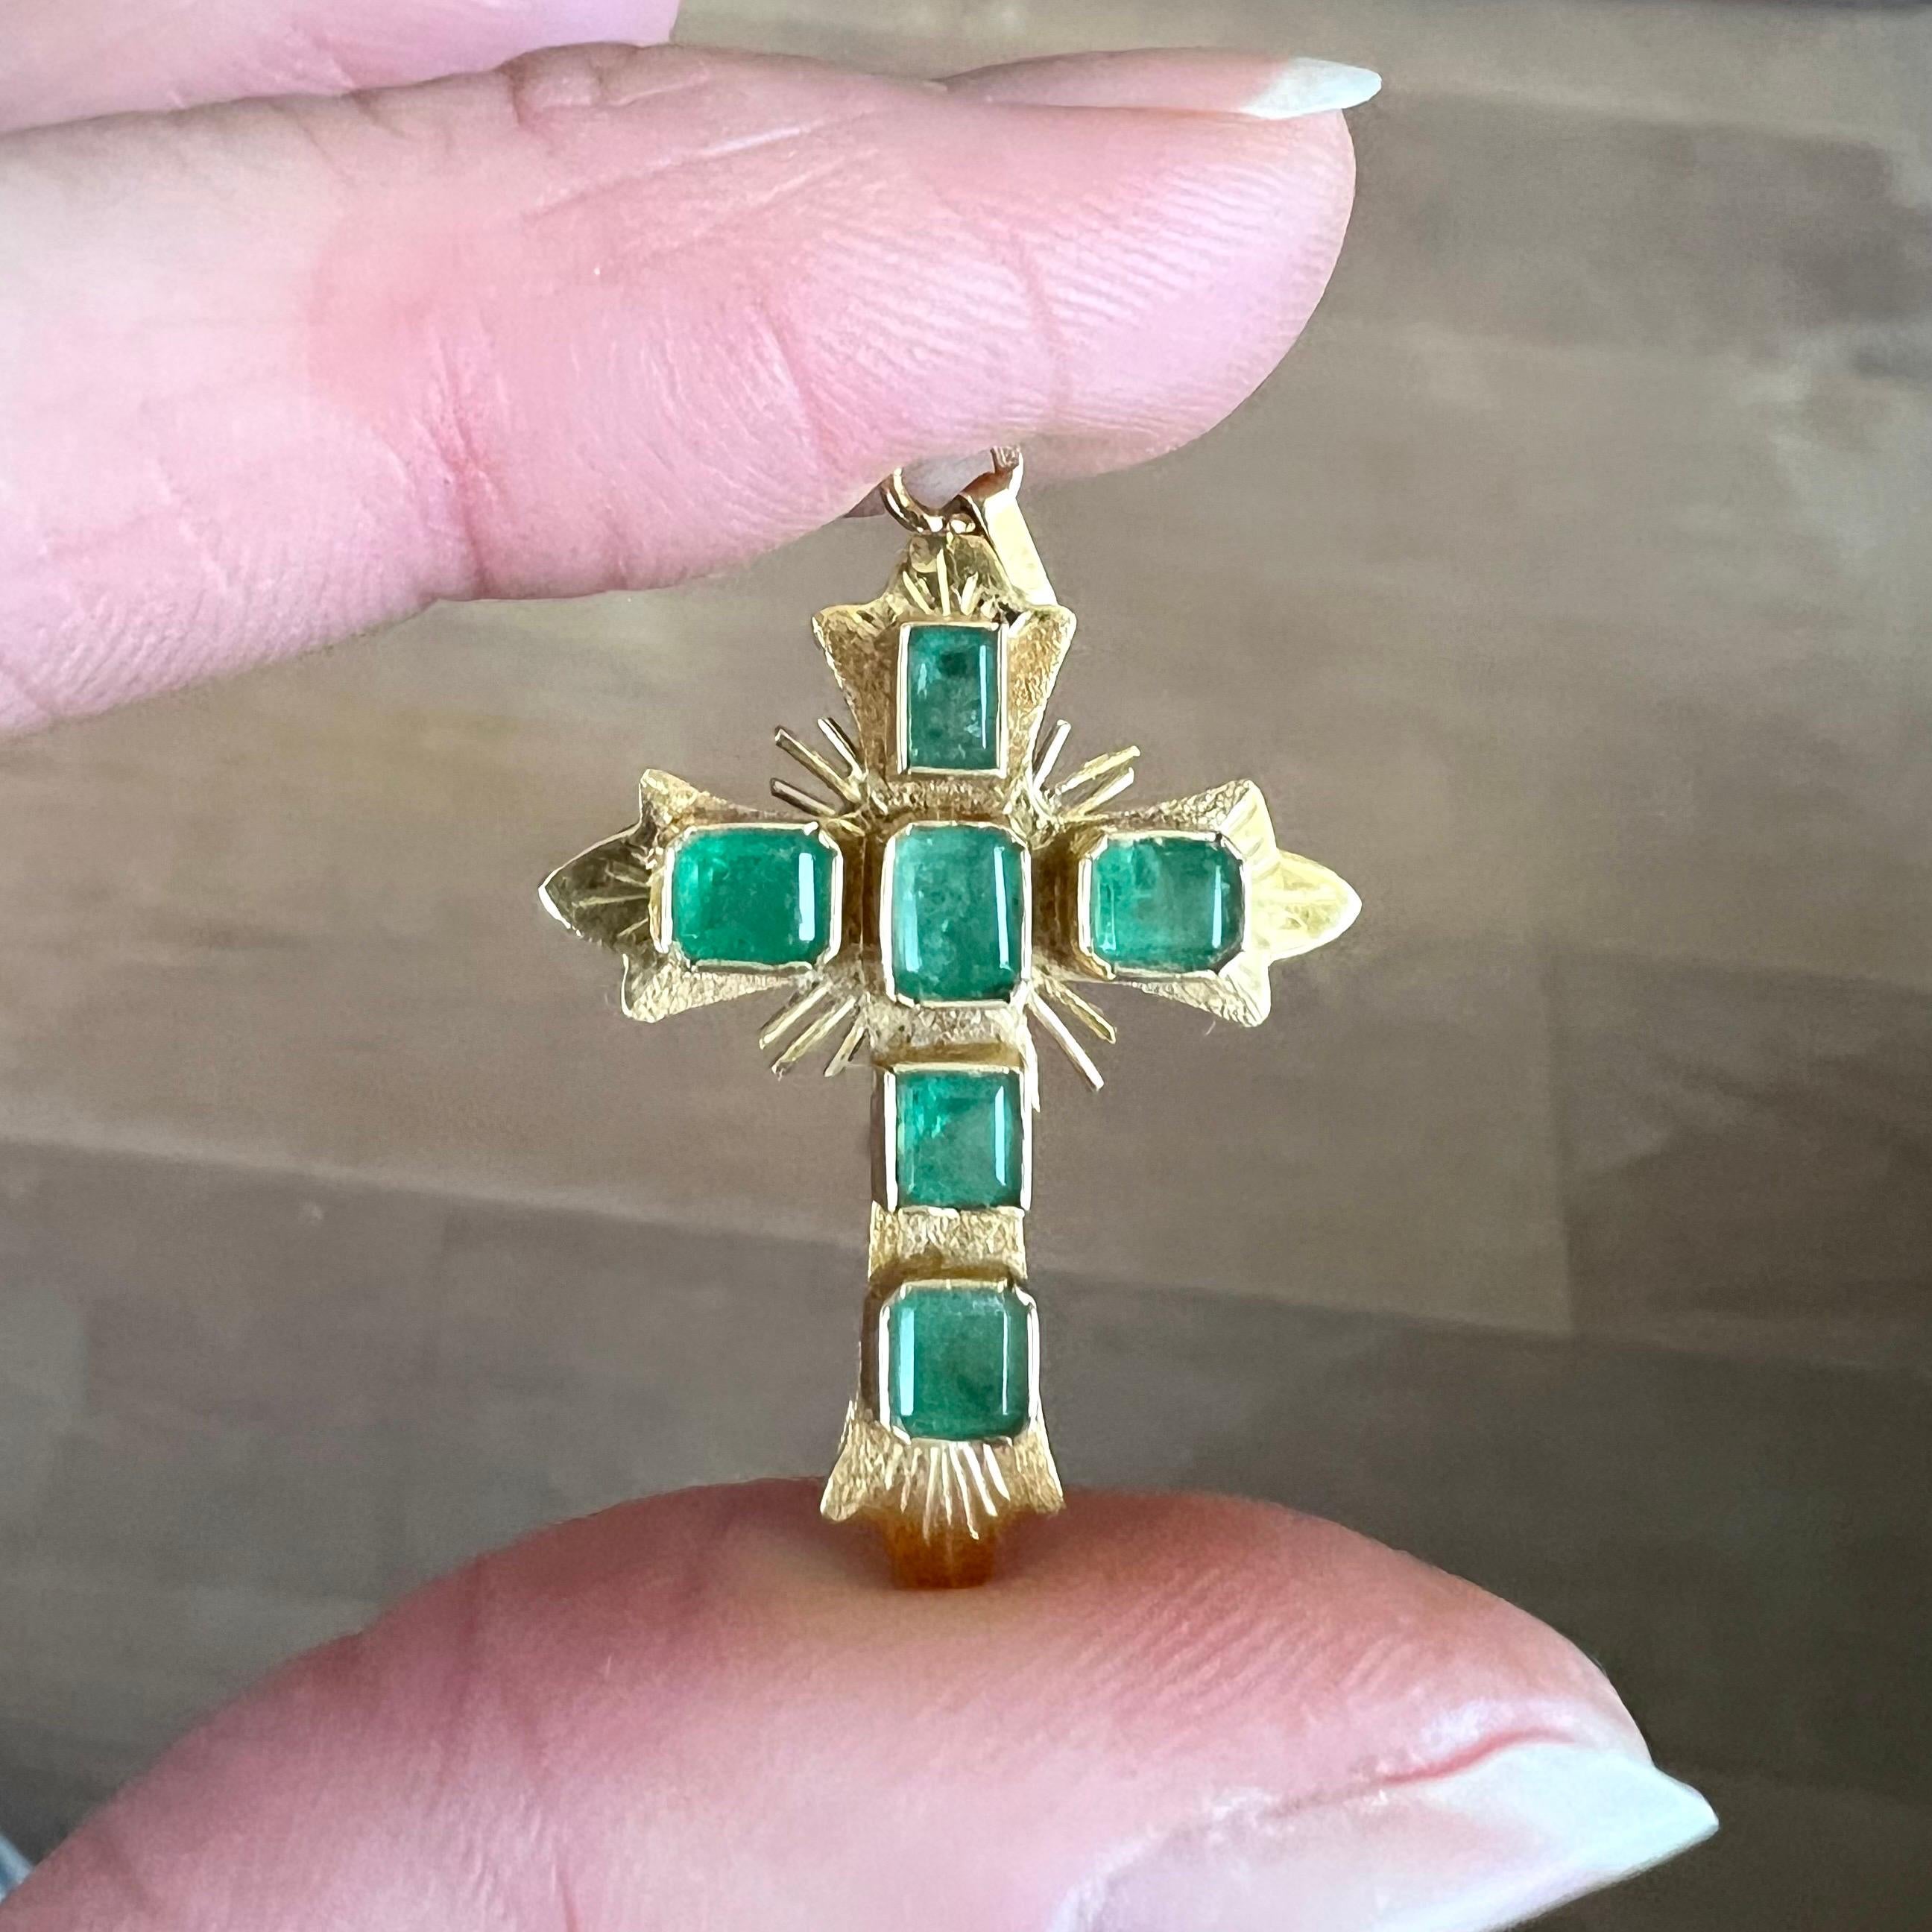 A wonderful ornate vintage 18 karat yellow gold emerald cross pendant. The pendant is beautifully made, encrusted with six individual emerald cut Colombian emerald gemstones. The bezel set emeralds are set in a gold satin finish and divine rays